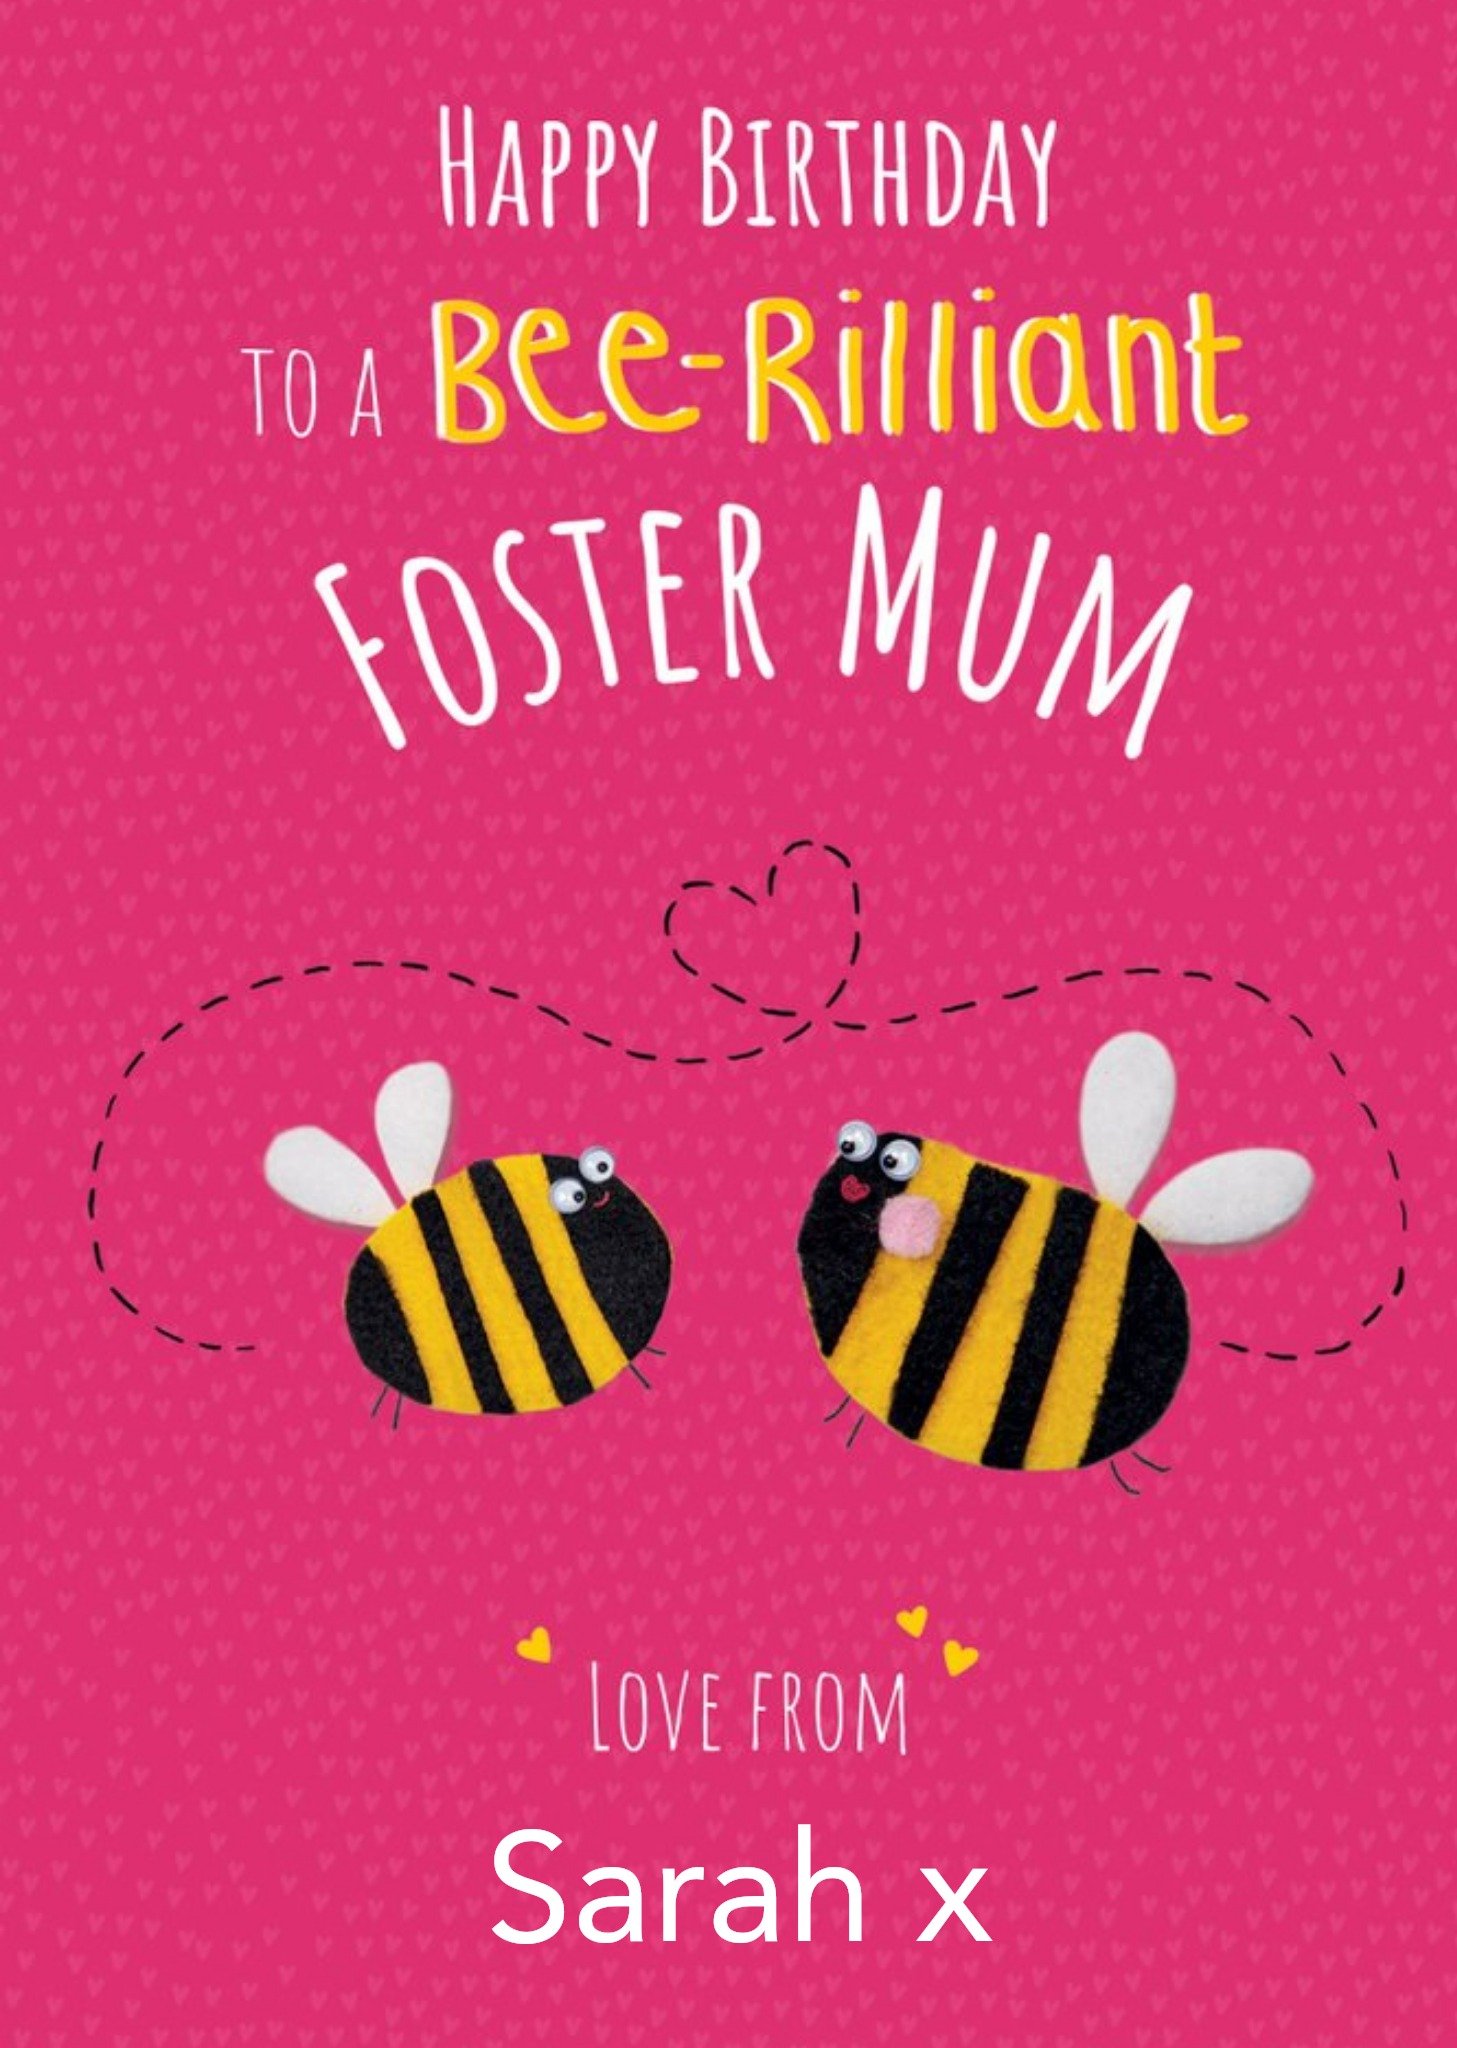 Moonpig Clintons Pink Bumble Bee Foster Mum Customisable Birthday Card, Large